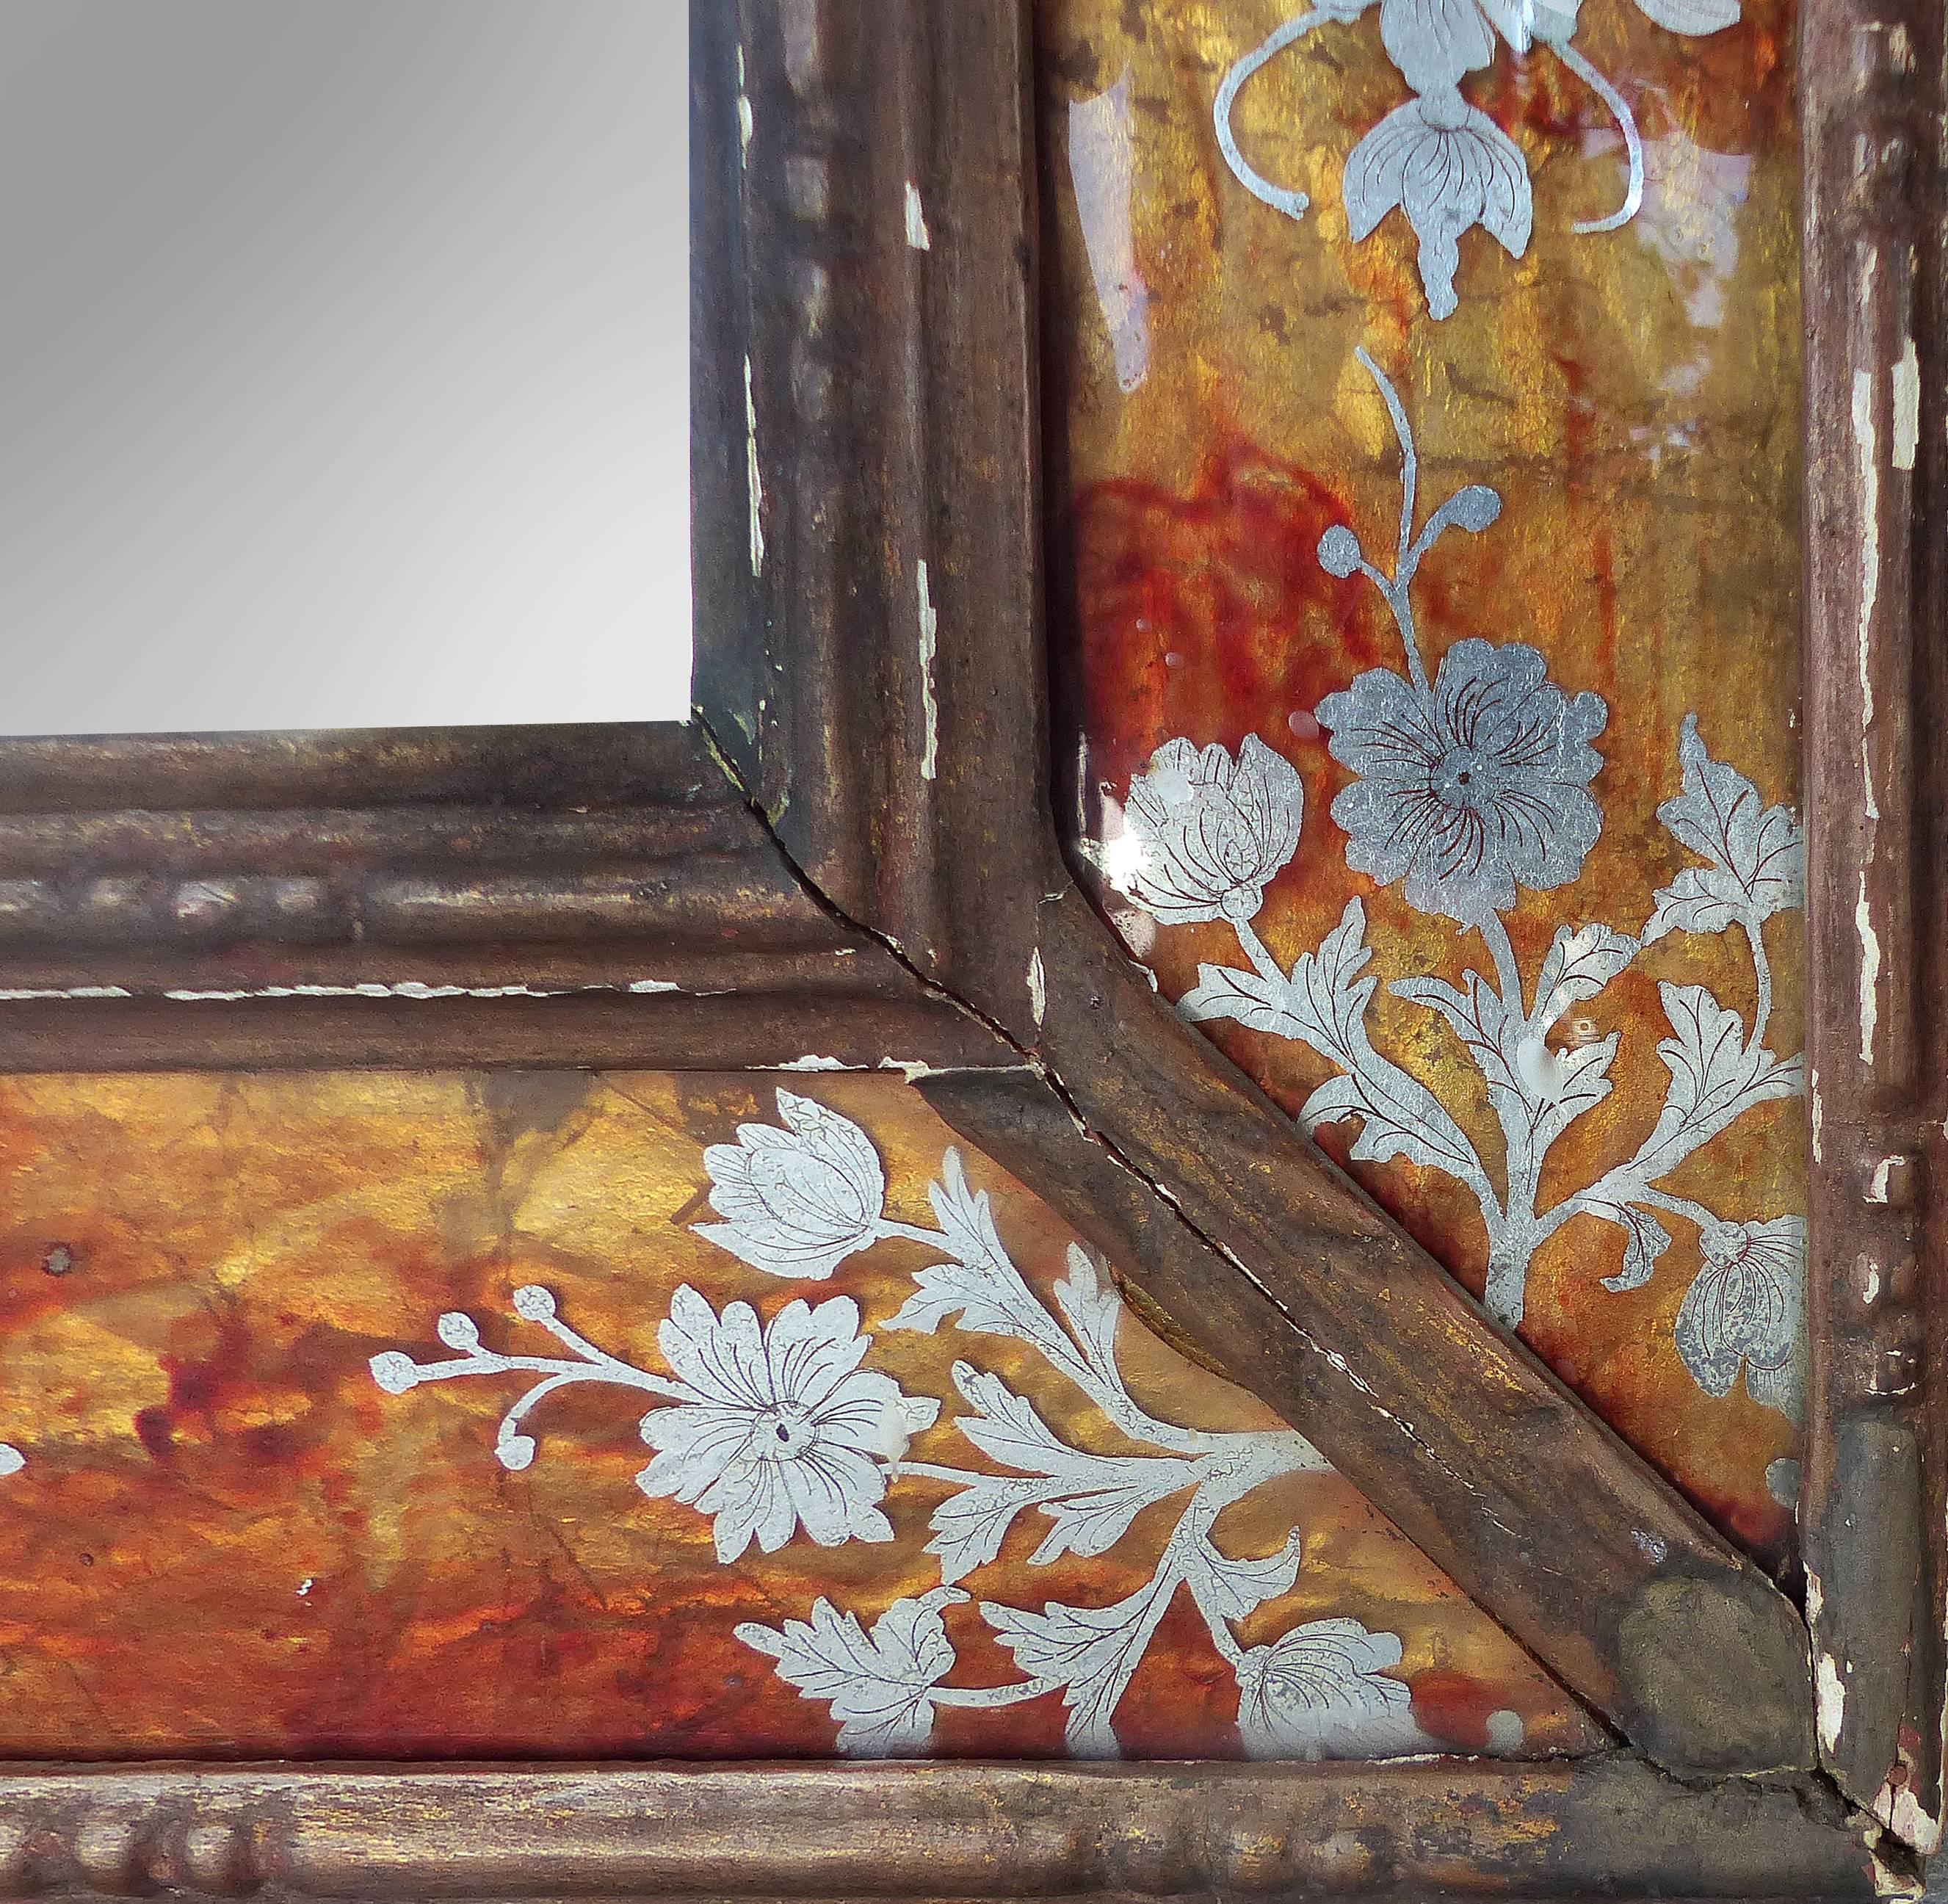 A striking 19th century antique mirror surrounded with églomisé panels. The glass panels are richly hued in bold contrast to the delicate silvered floral motif. Displayed in a carved wood frame which shows some finish flaking.
Verre Églomisé is a